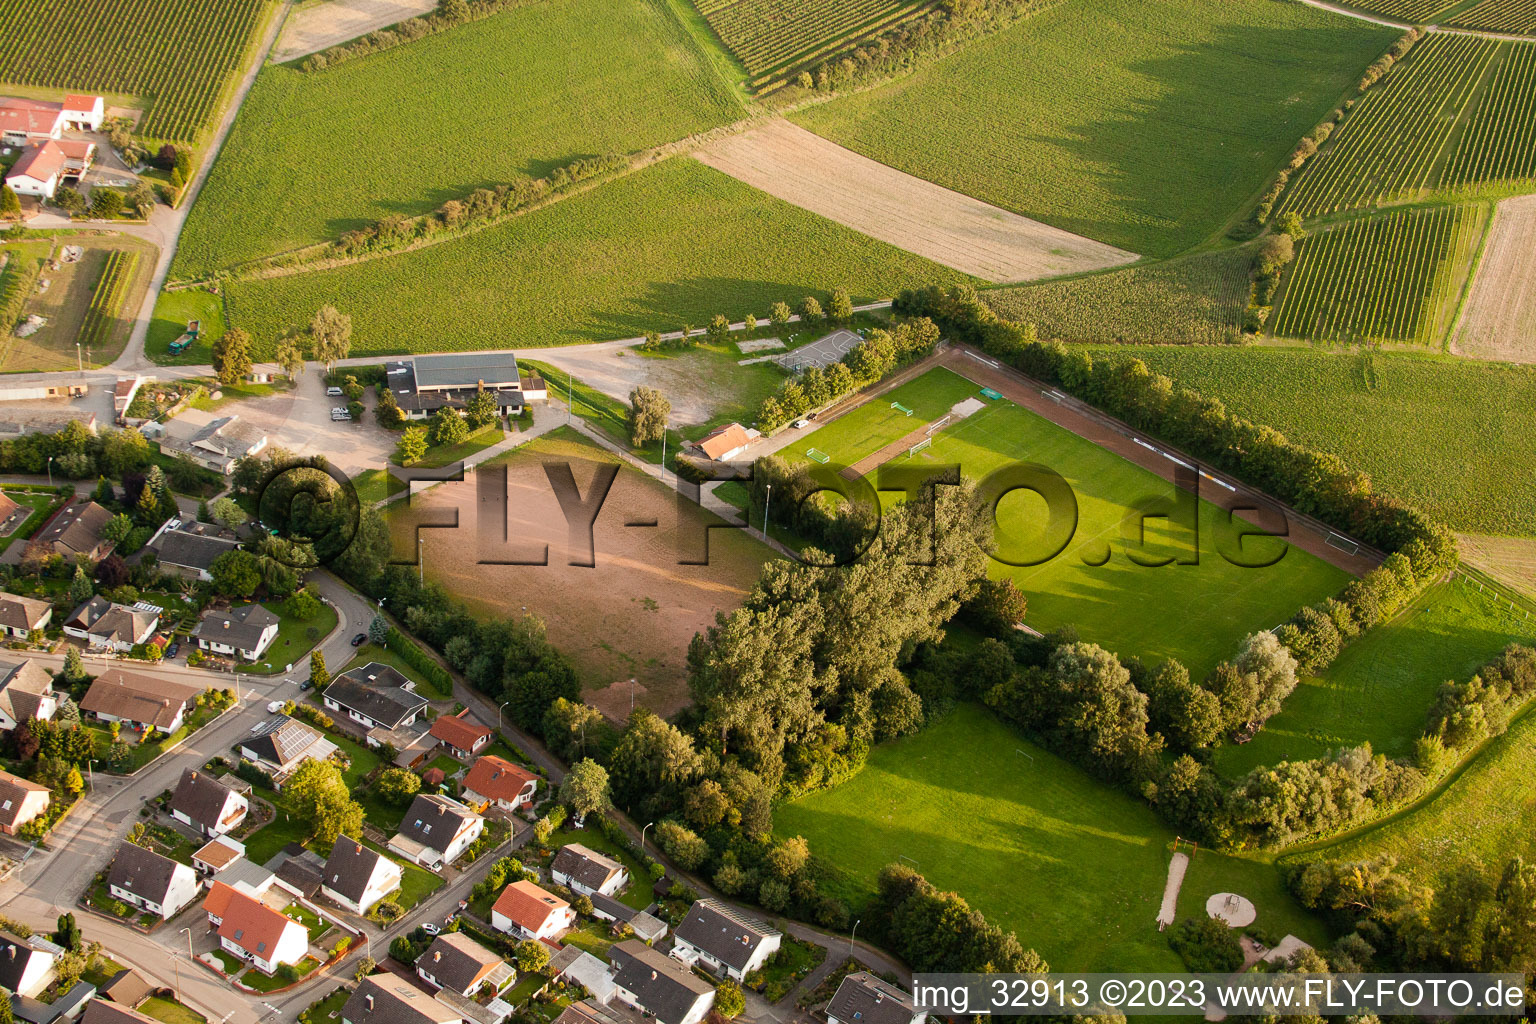 Aerial view of Sports fields in Insheim in the state Rhineland-Palatinate, Germany